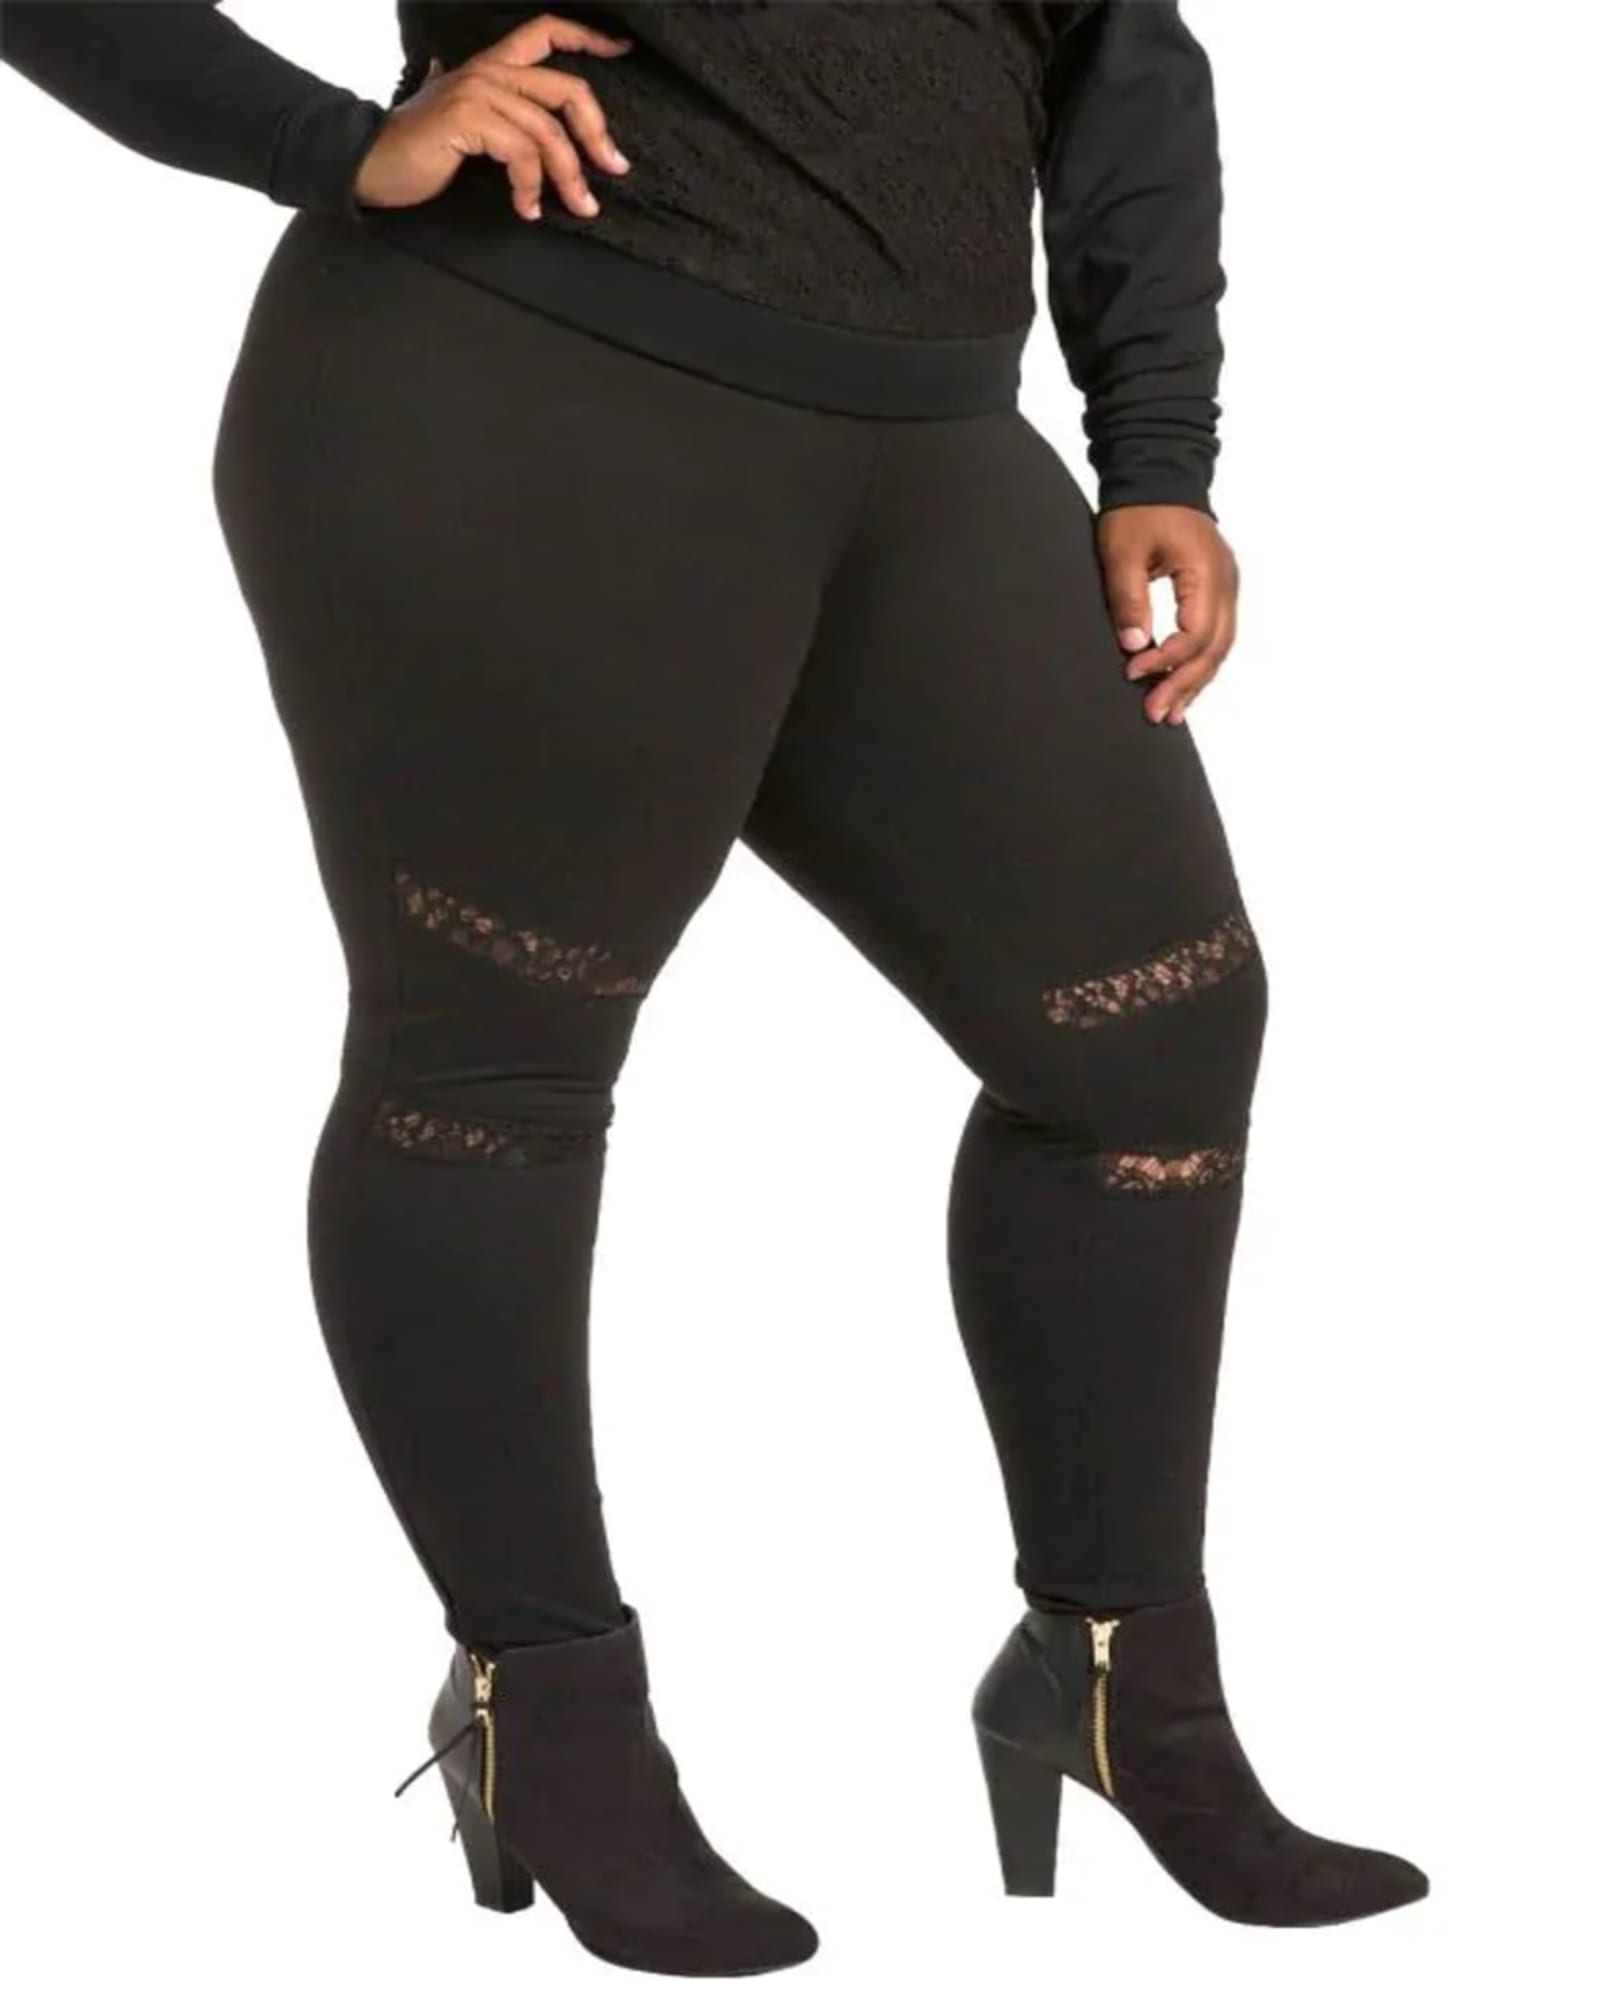 Plus Size High-waist Reflective Piping Fitness Leggings Grey 3x